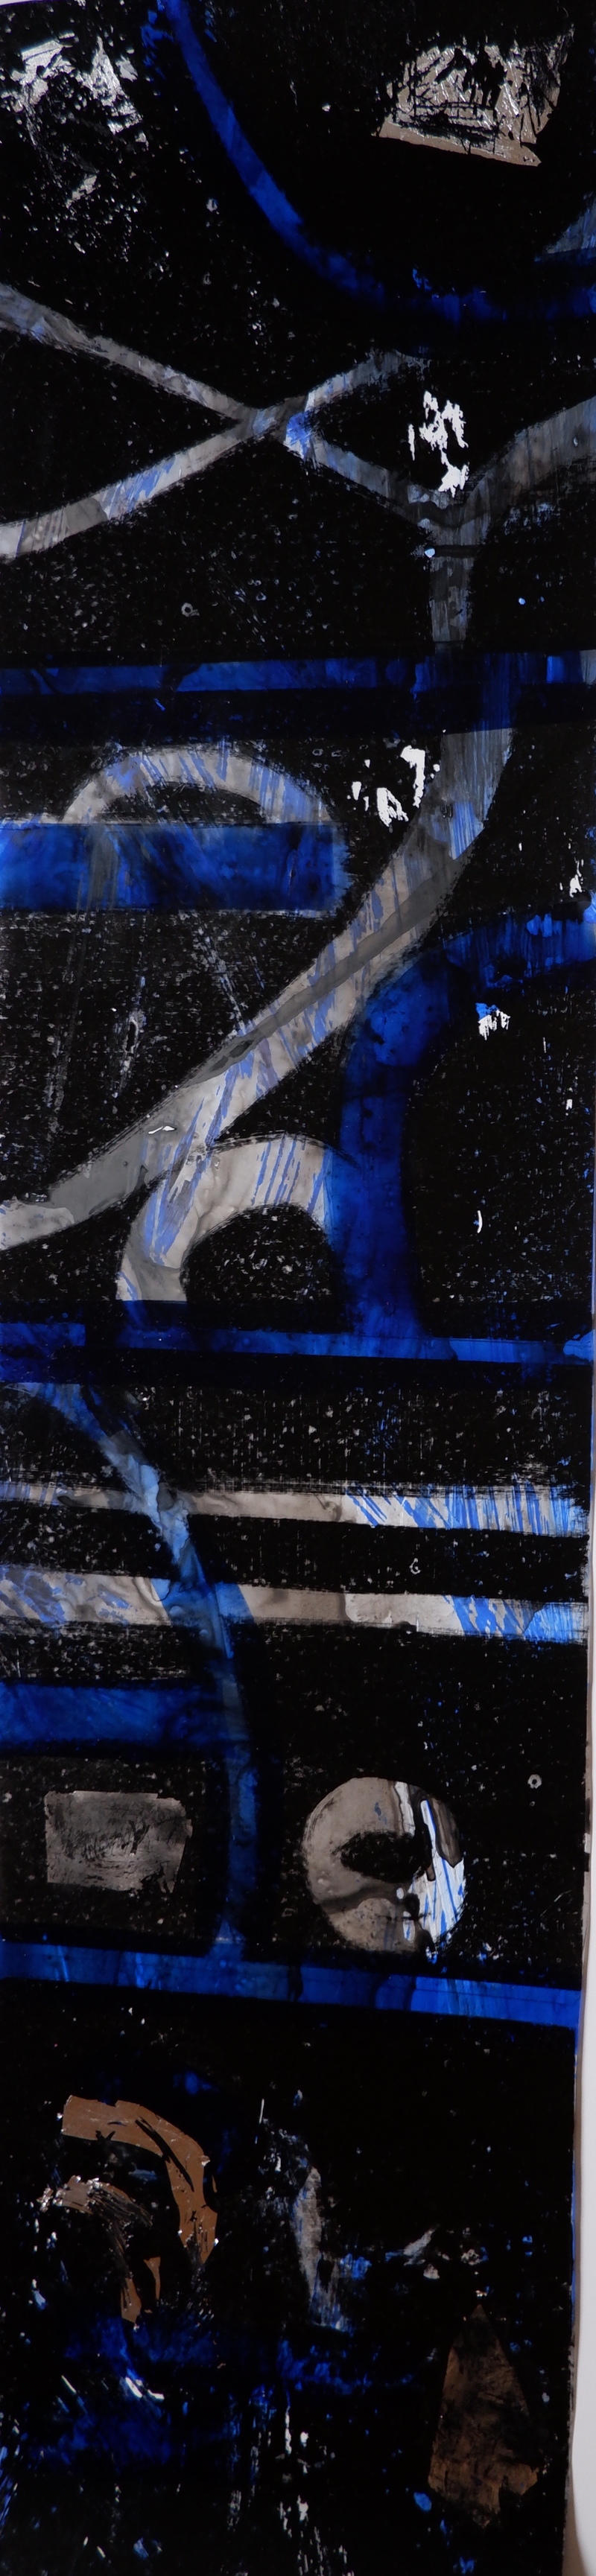 Barbara Shapiro  "Film Strips Monotype on Dura-Lar with India ink and foil